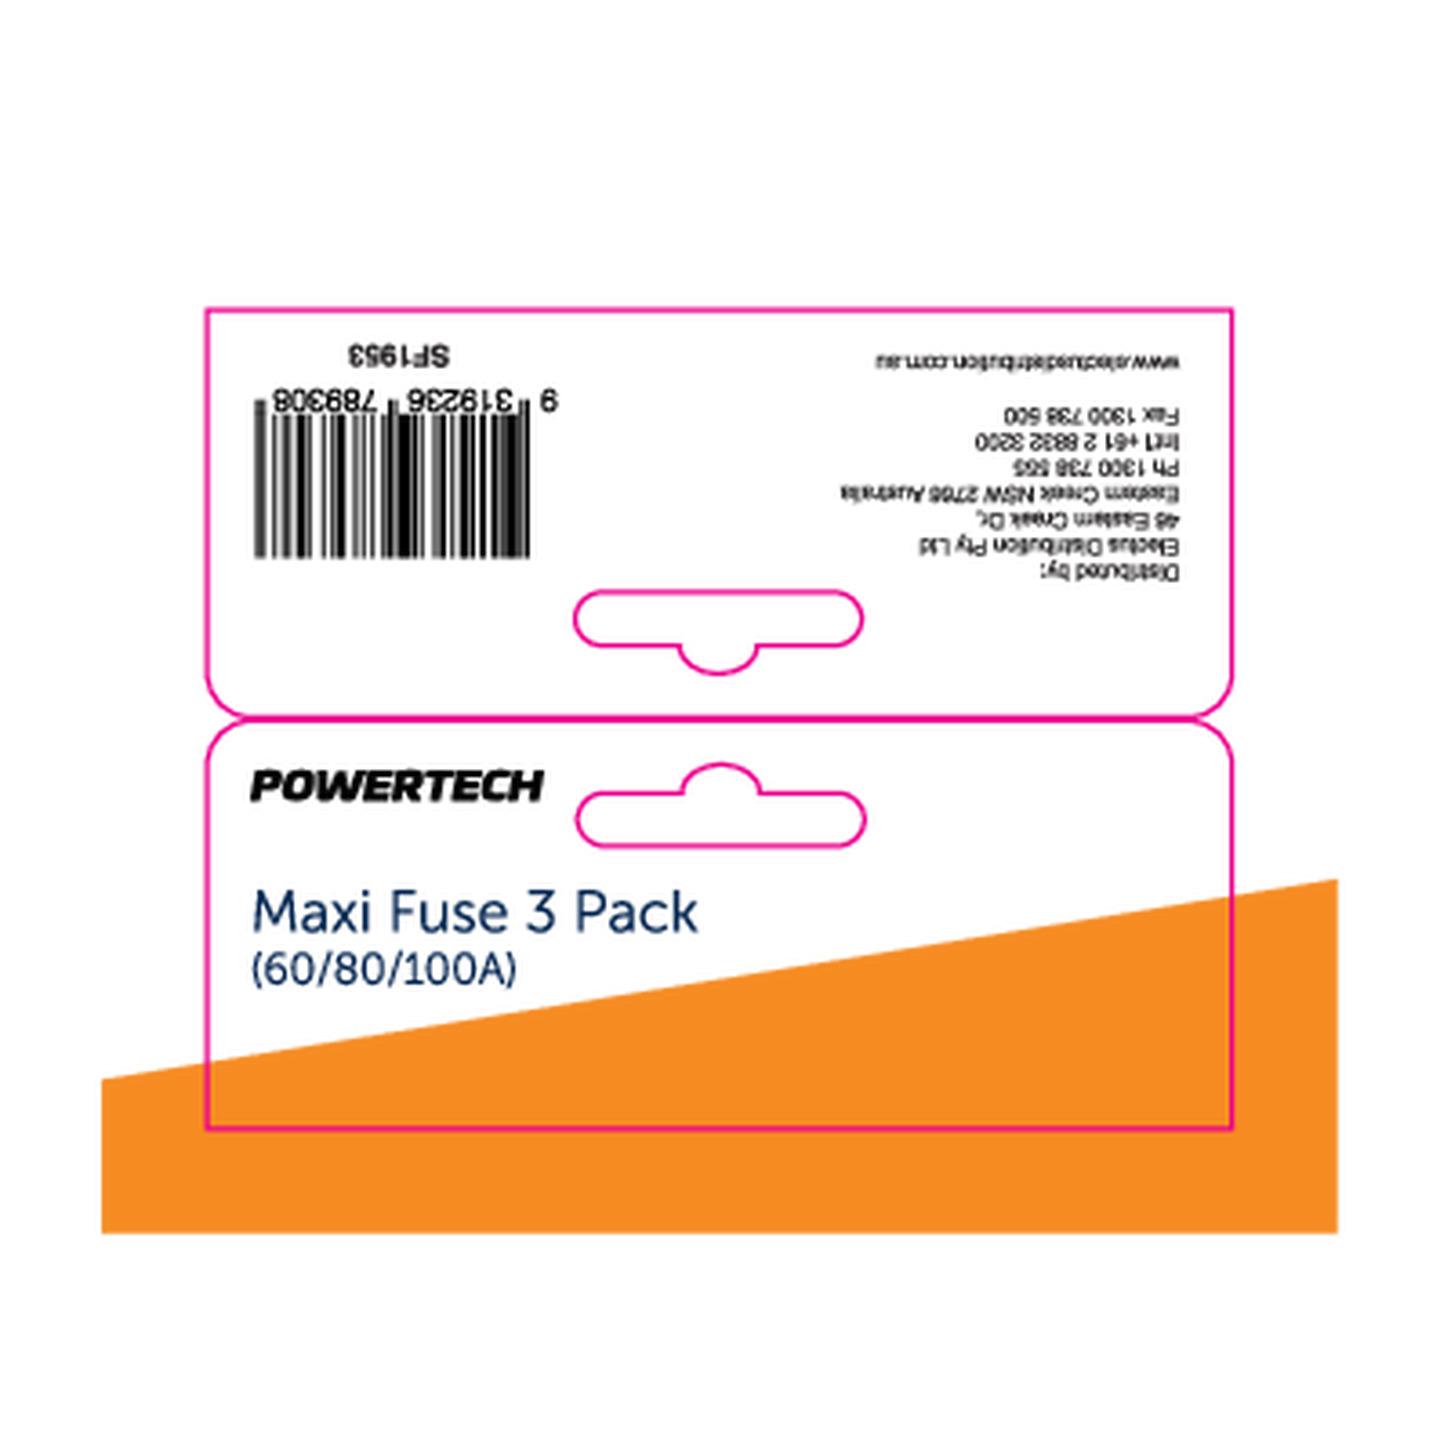 Maxi Fuse 3 Pack 60/80/100A